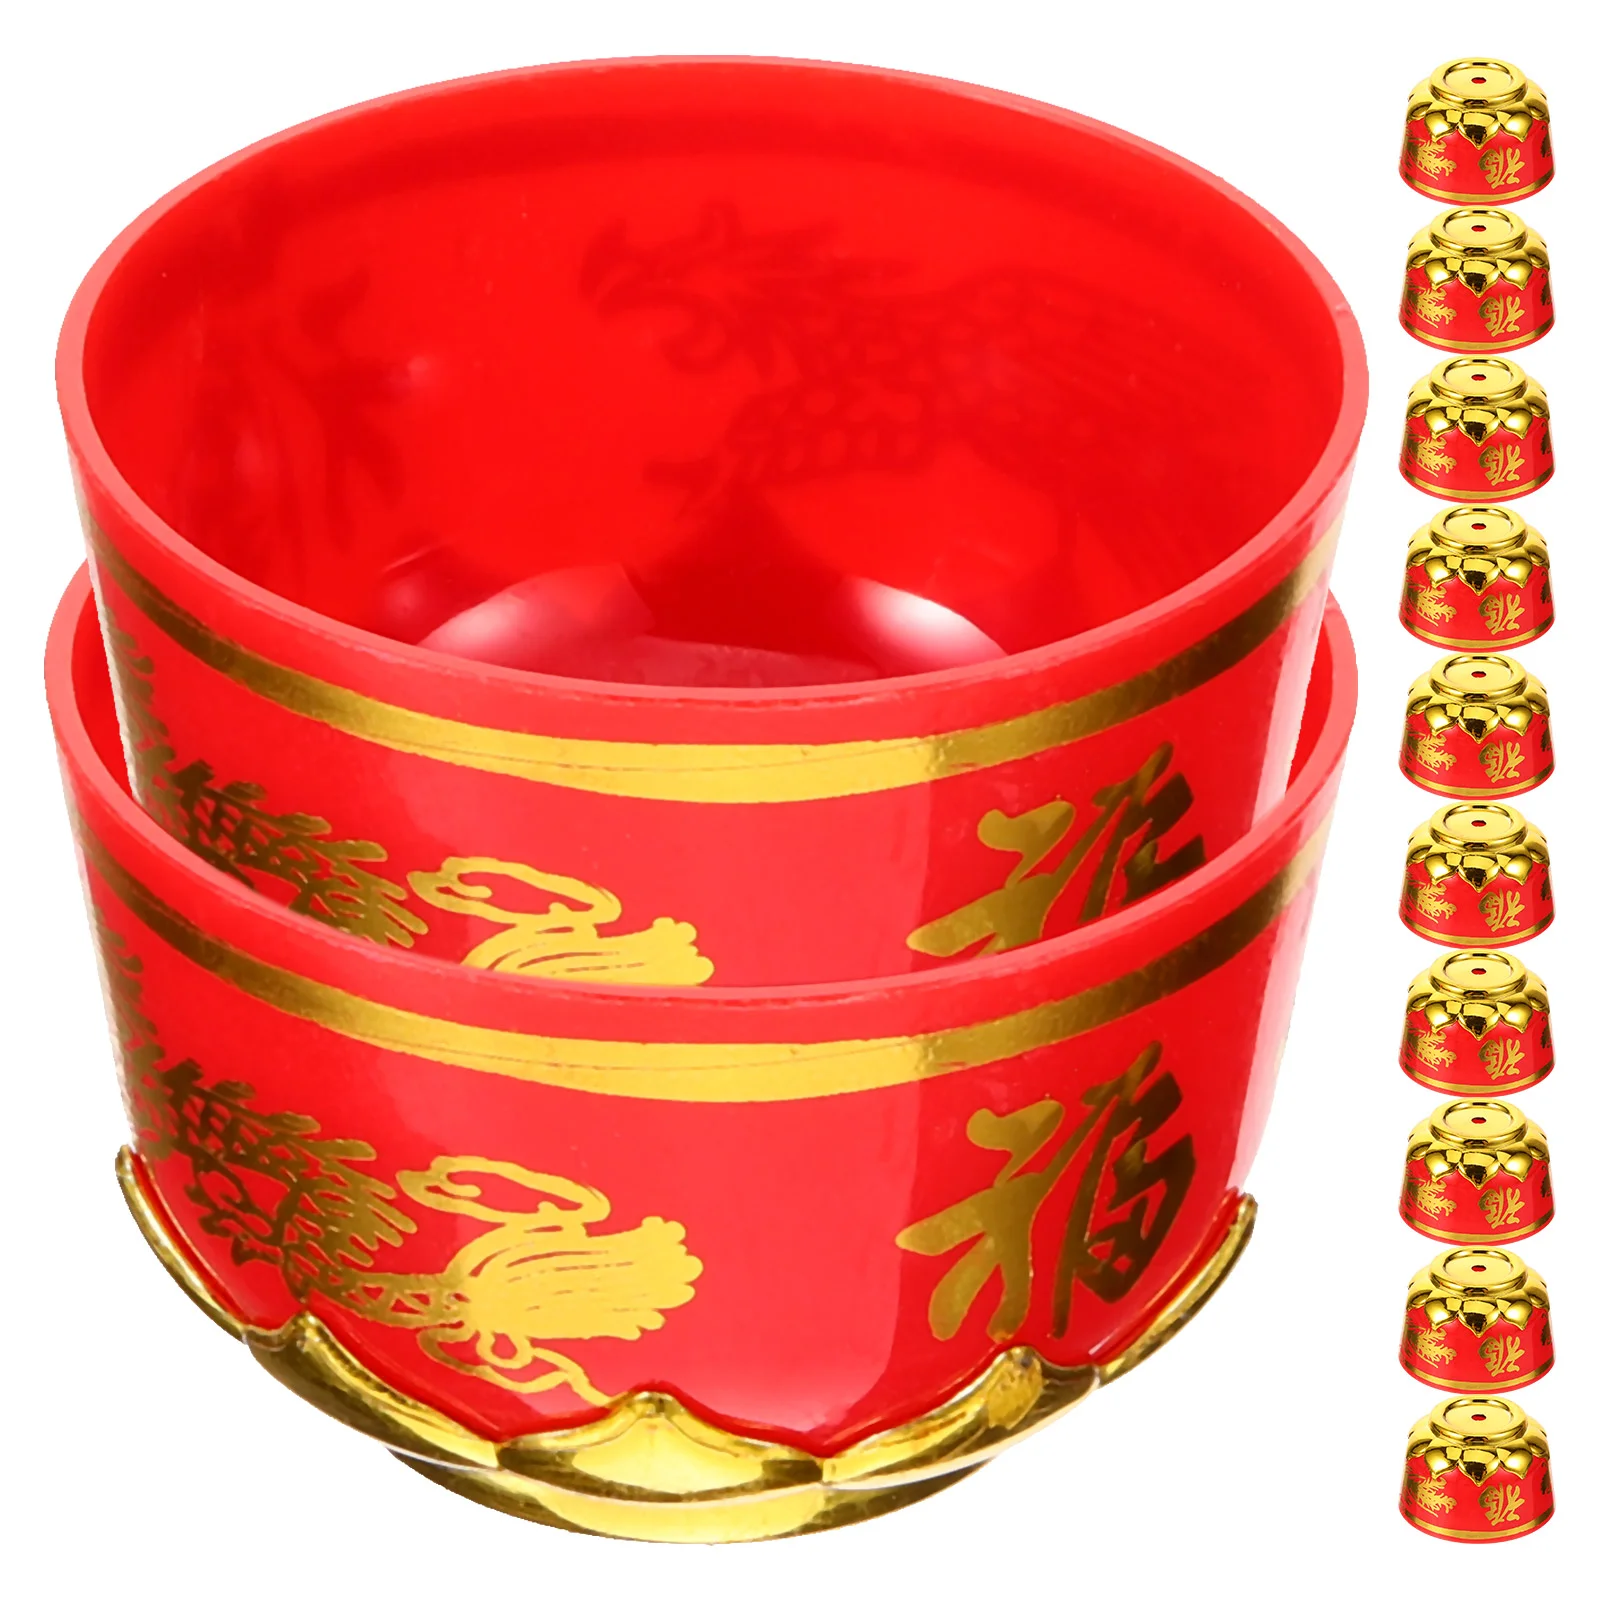 

24pcs Decorative Holy Water Cup Auspicious Offering Bowl Multi-functional Storage Cup